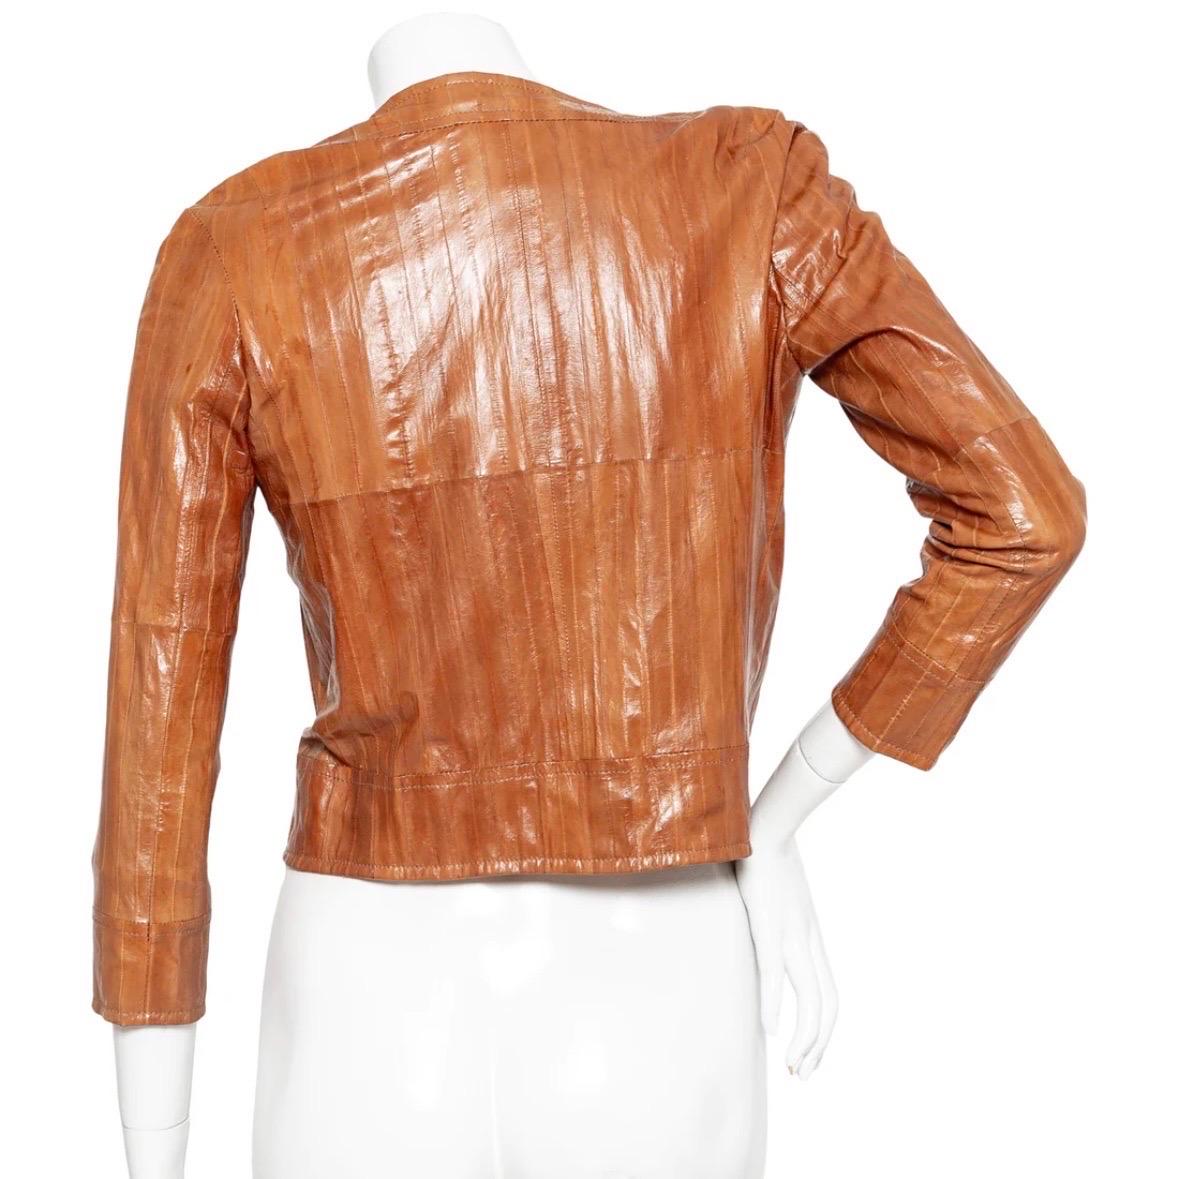 Christian Dior Brown Eel Leather Grommet Jacket (Galliano For Dior) For Sale 3